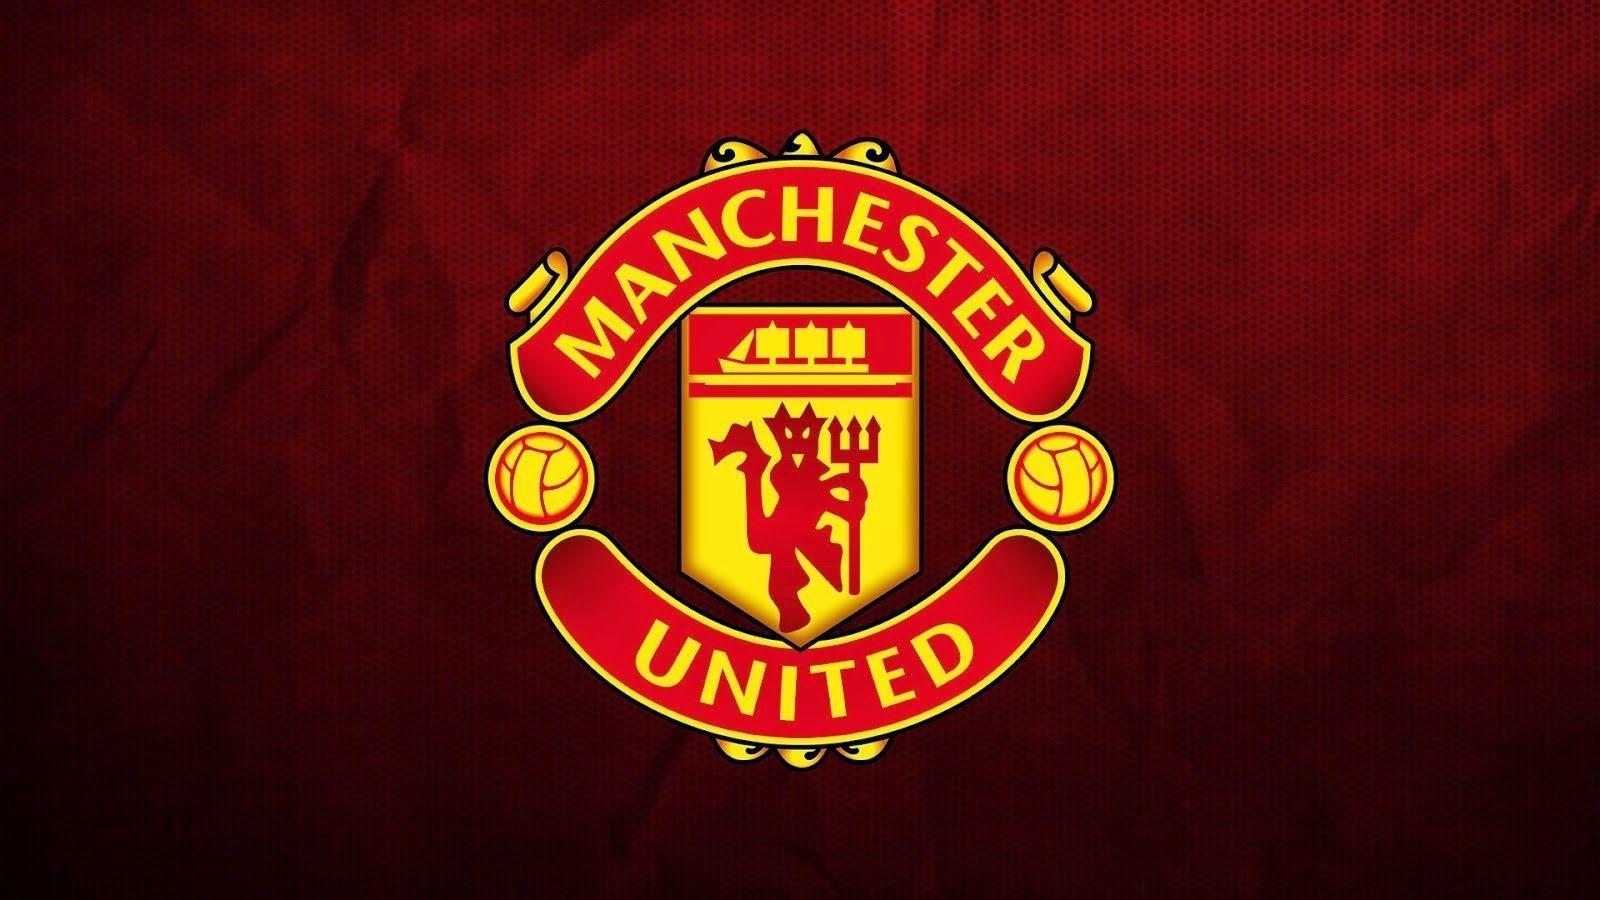 Top Manchester United Wallpaper Download FULL HD 1920×1080